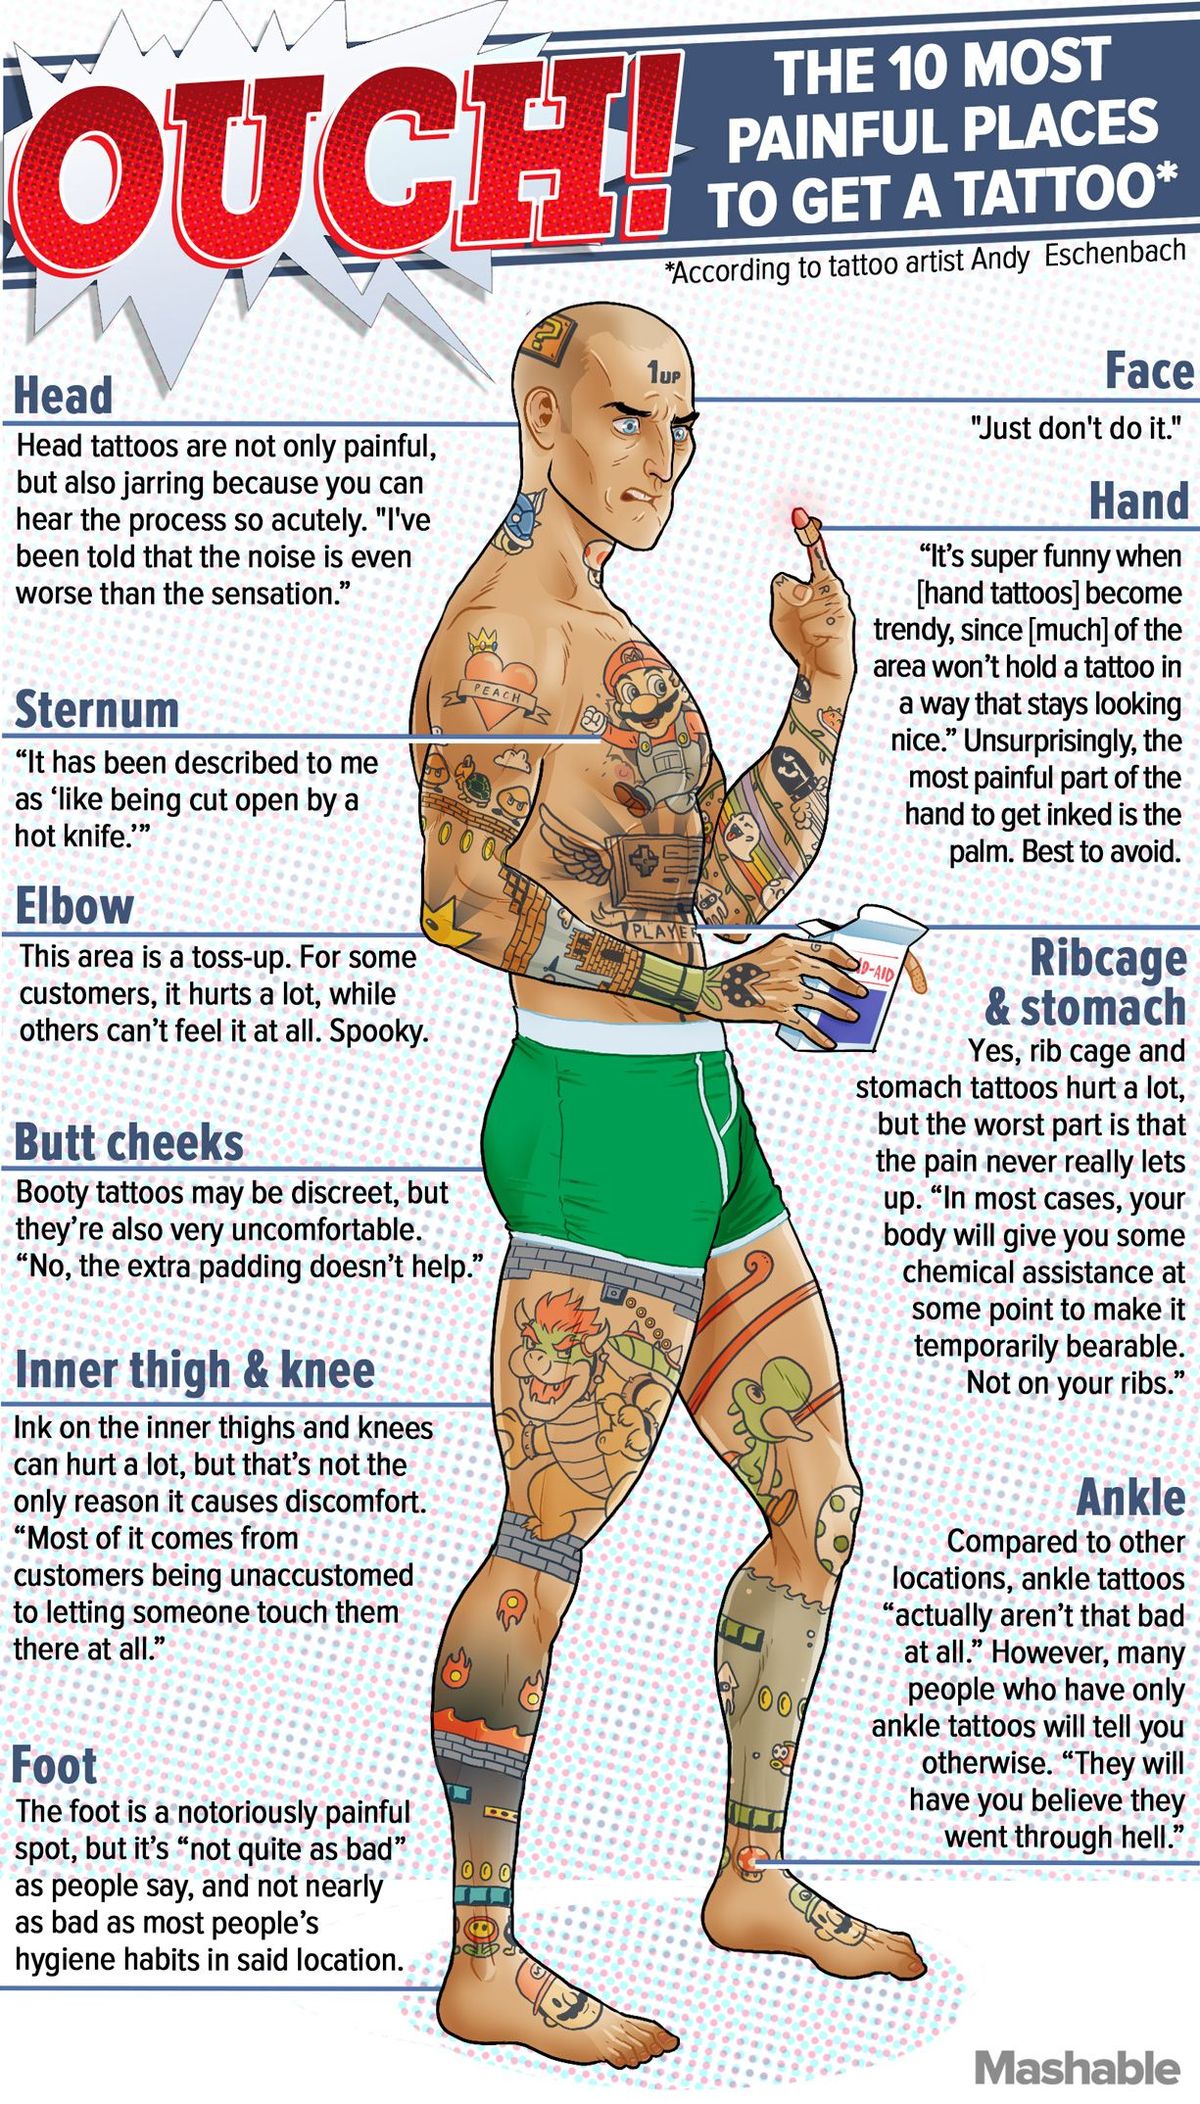 The 10 most painful places to get a tattoo on Inspirationde